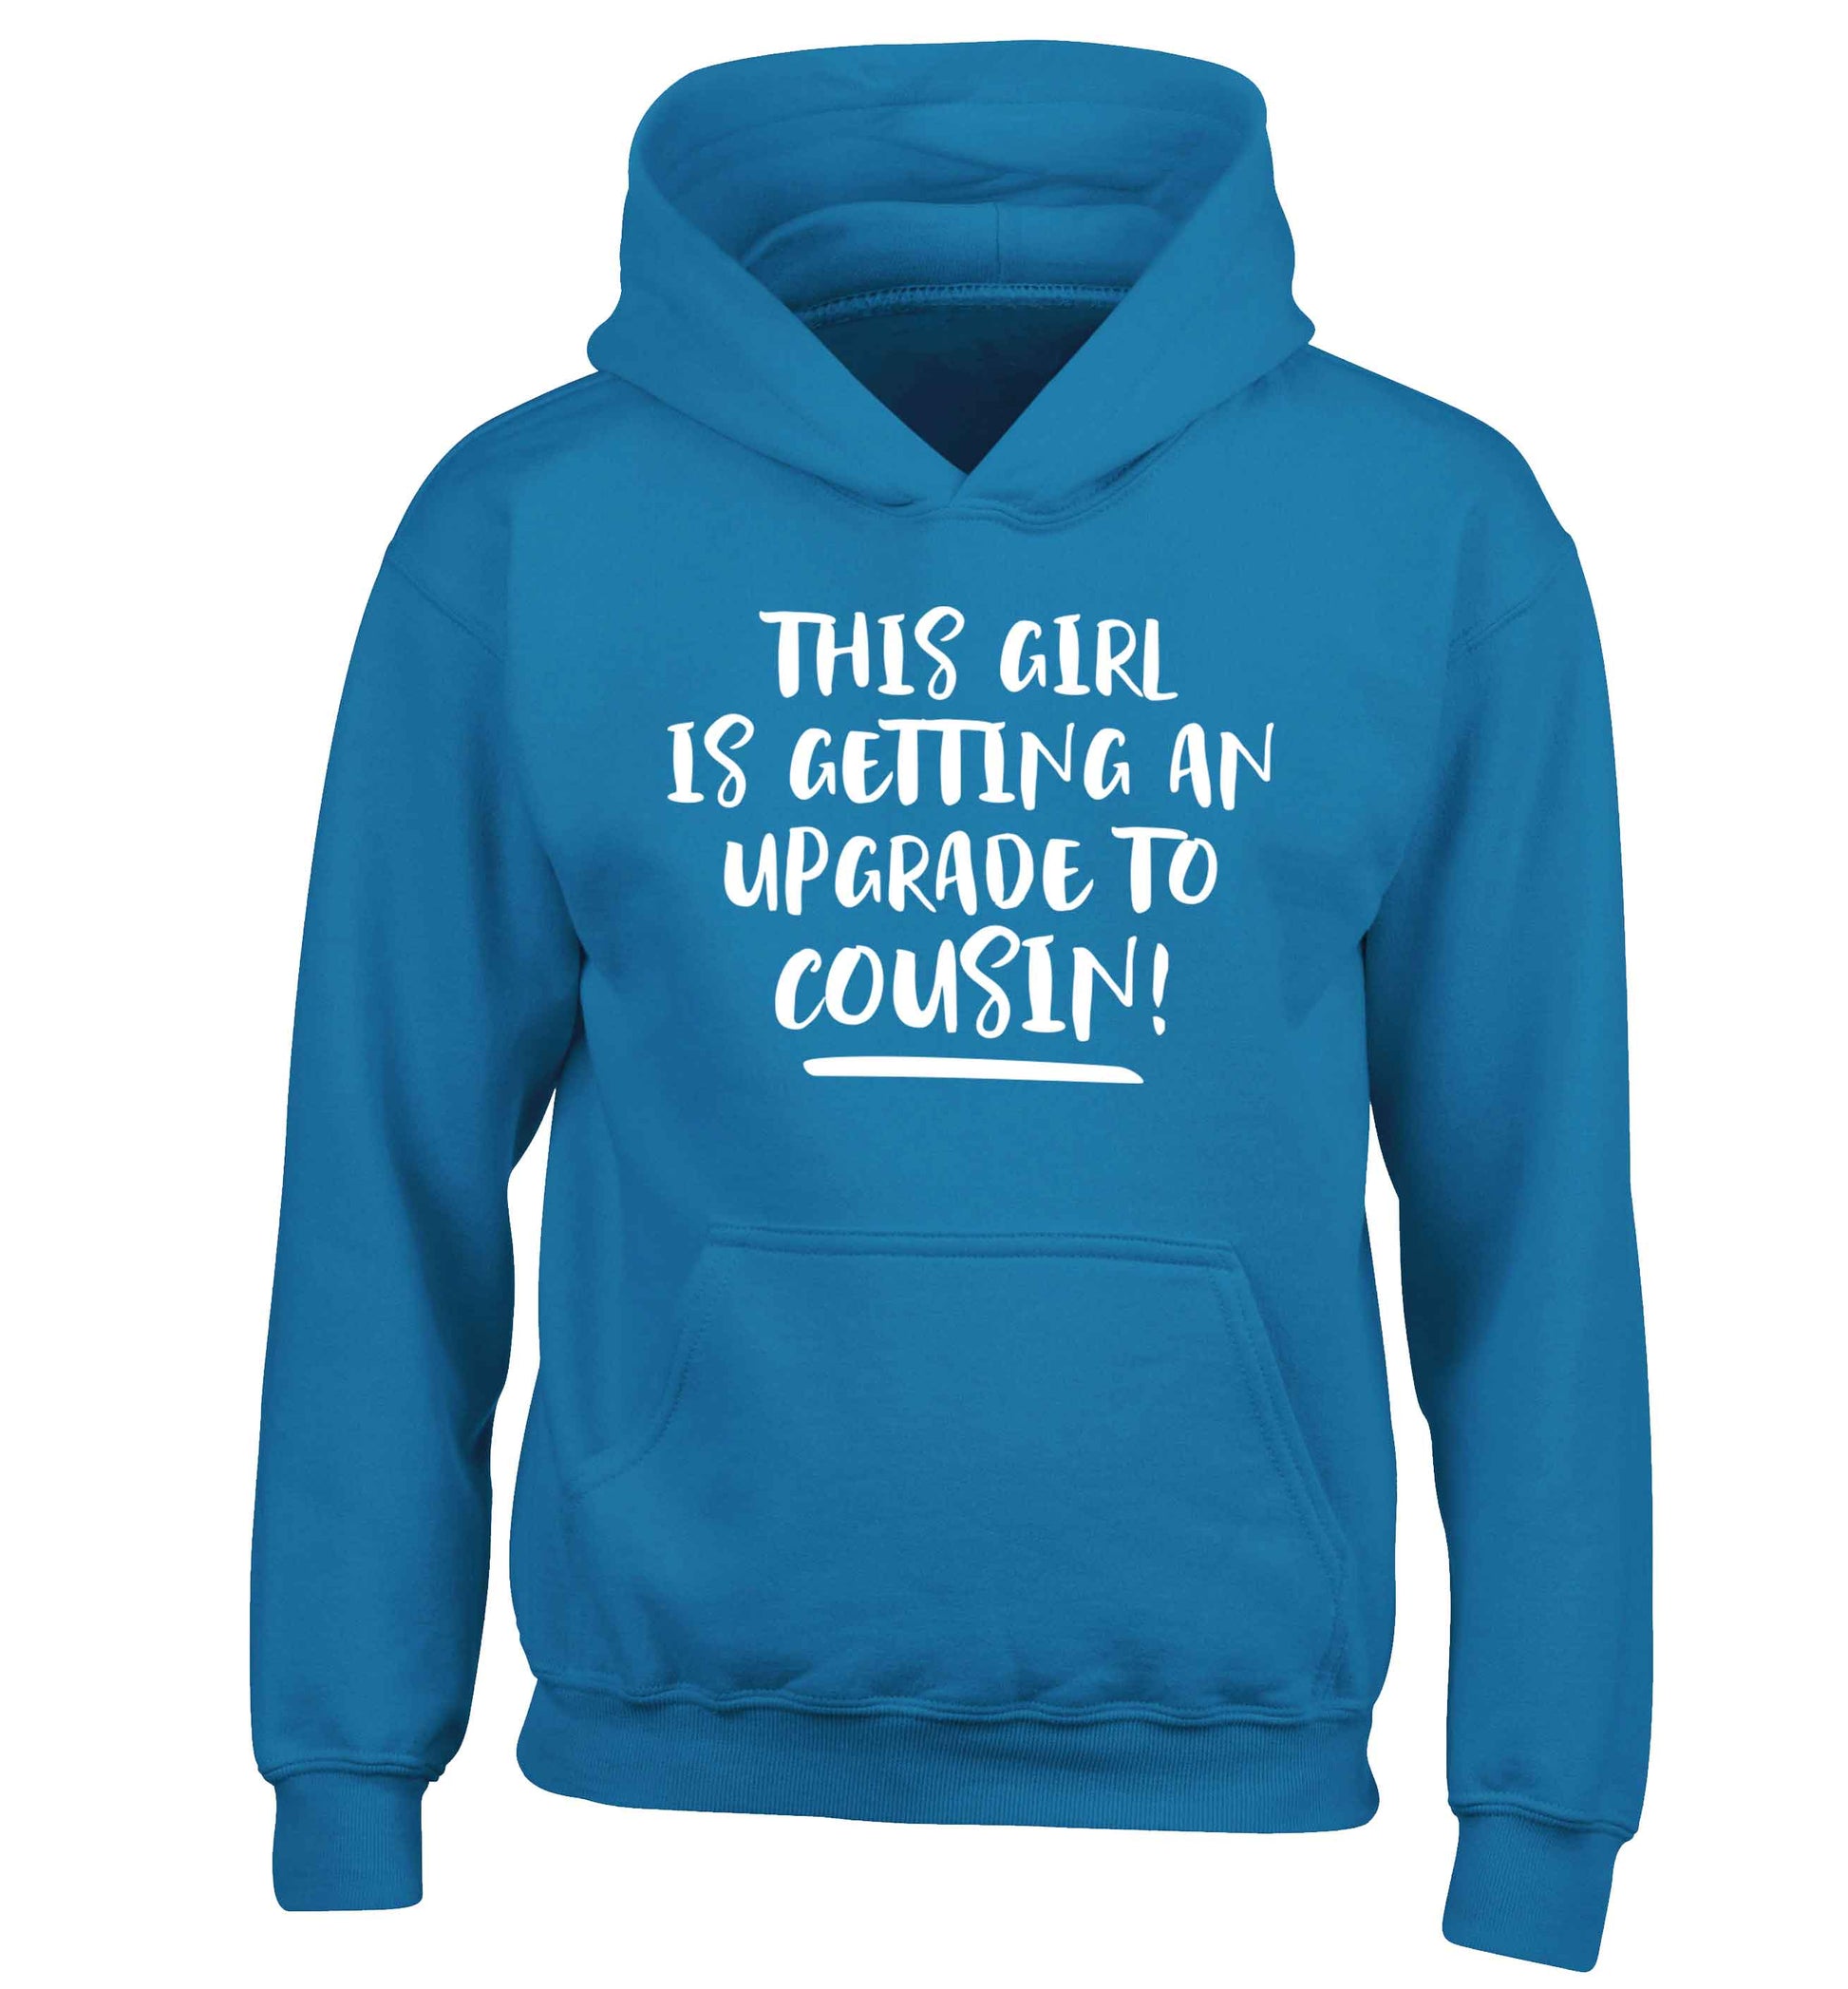 This girl is getting an upgrade to cousin! children's blue hoodie 12-13 Years